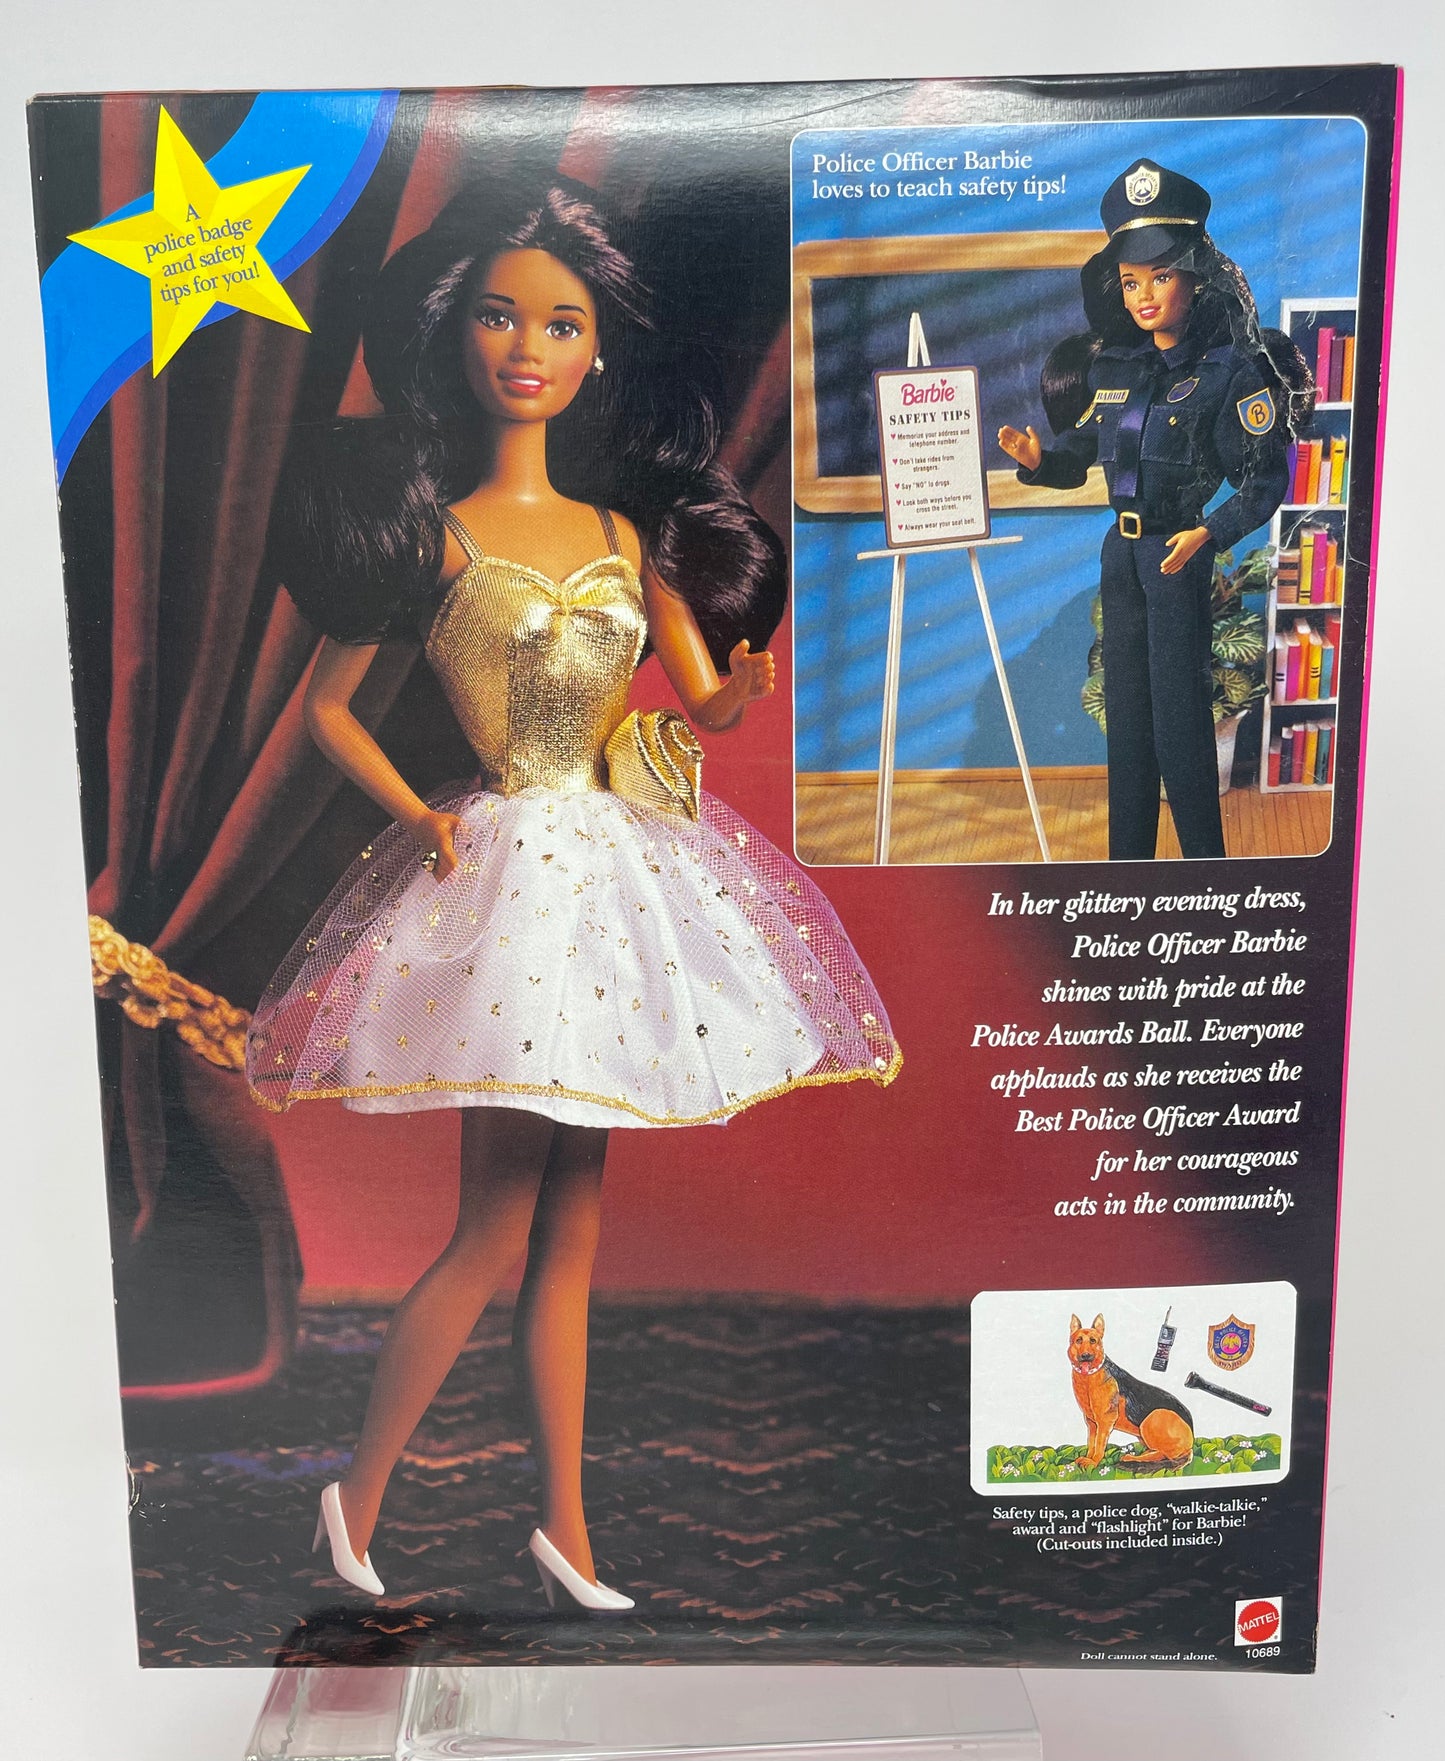 POLICE OFFICER BARBIE - BRUNETTE - SPECIAL LIMITED EDITION THE CAREER COLLECTION #10689 - MATTEL 1993